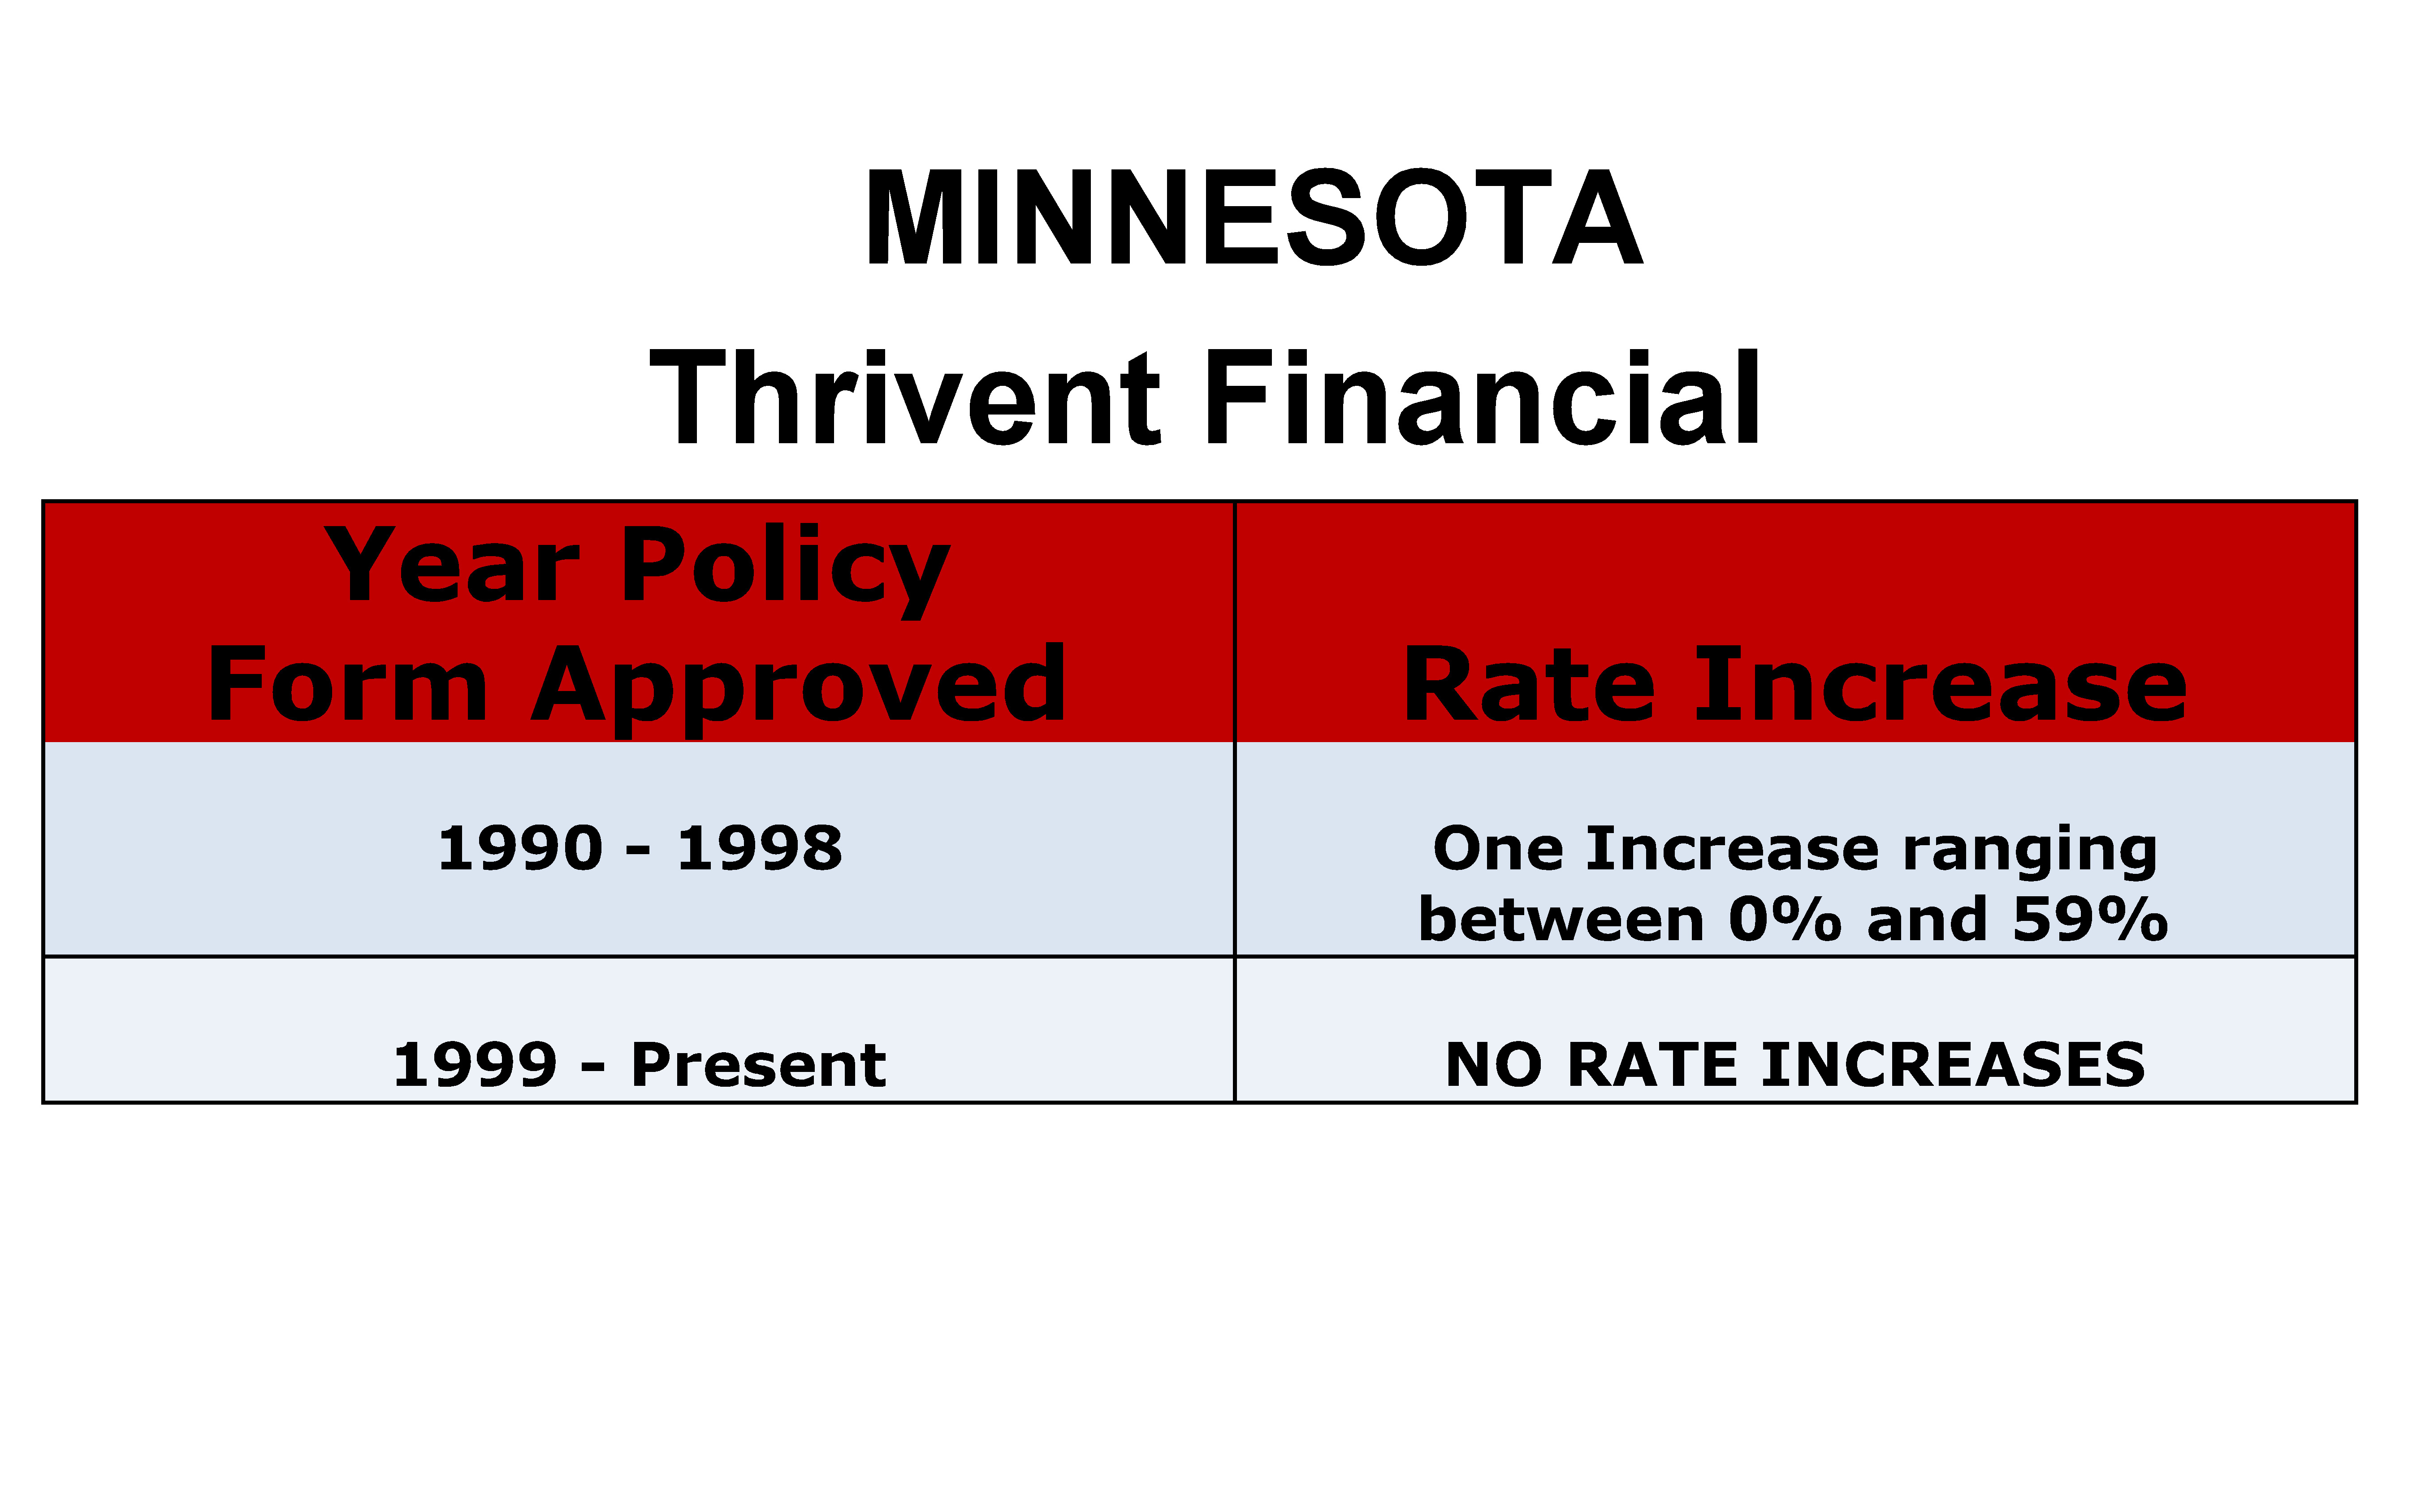 Thrivent Financial Long Term Care Insurance Rate Increases